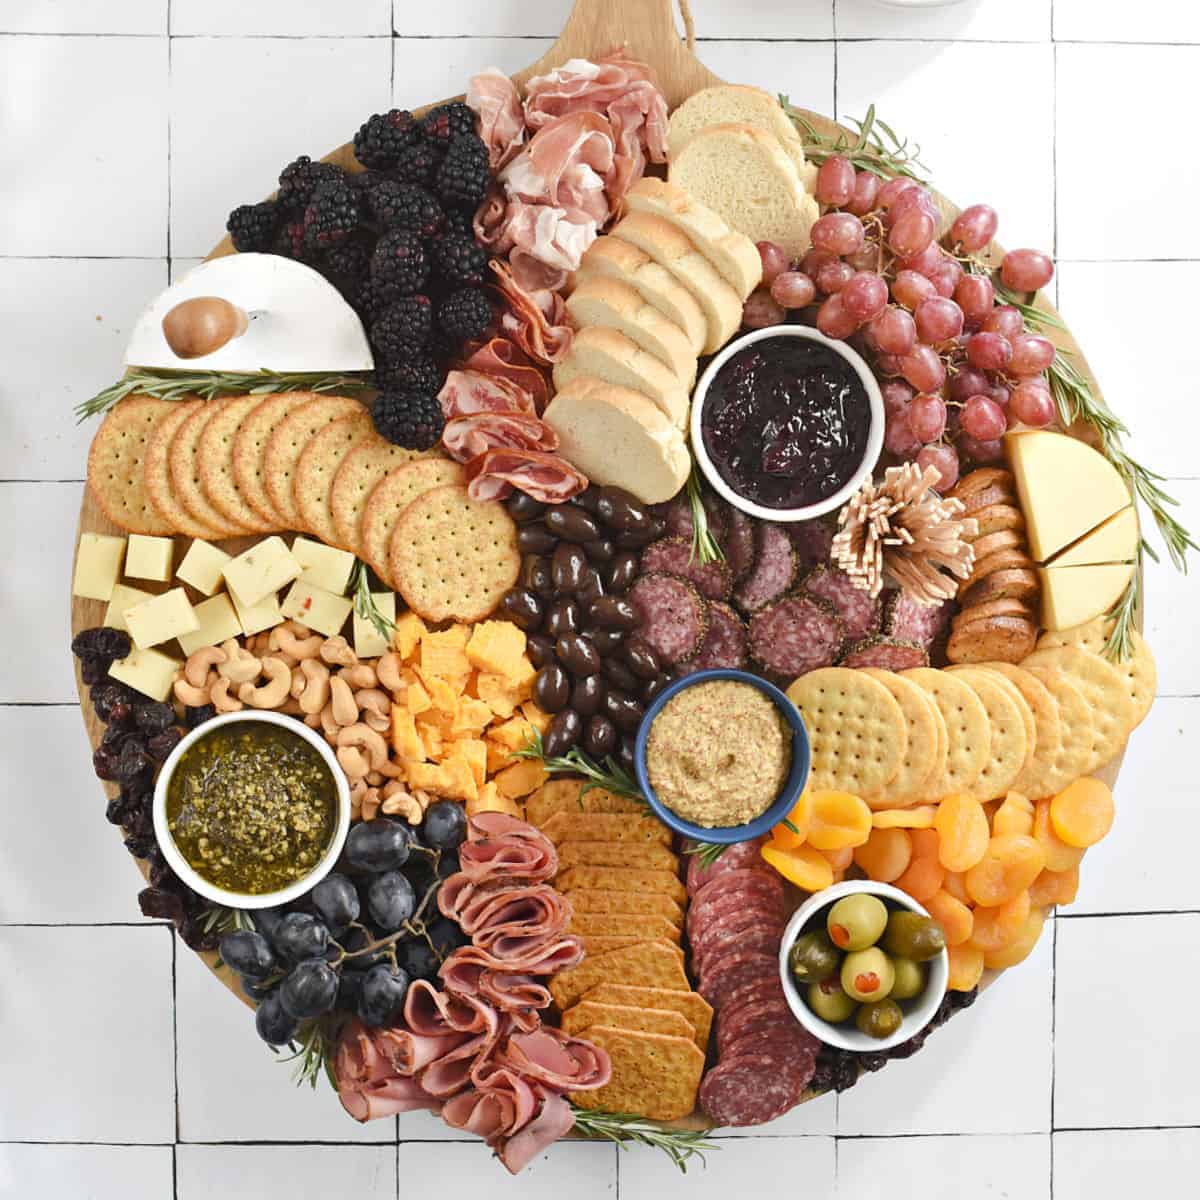 A large round board topped with slices of meats, cheeses, bread, crackers, dried apricots and cherries, grapes, and nuts.